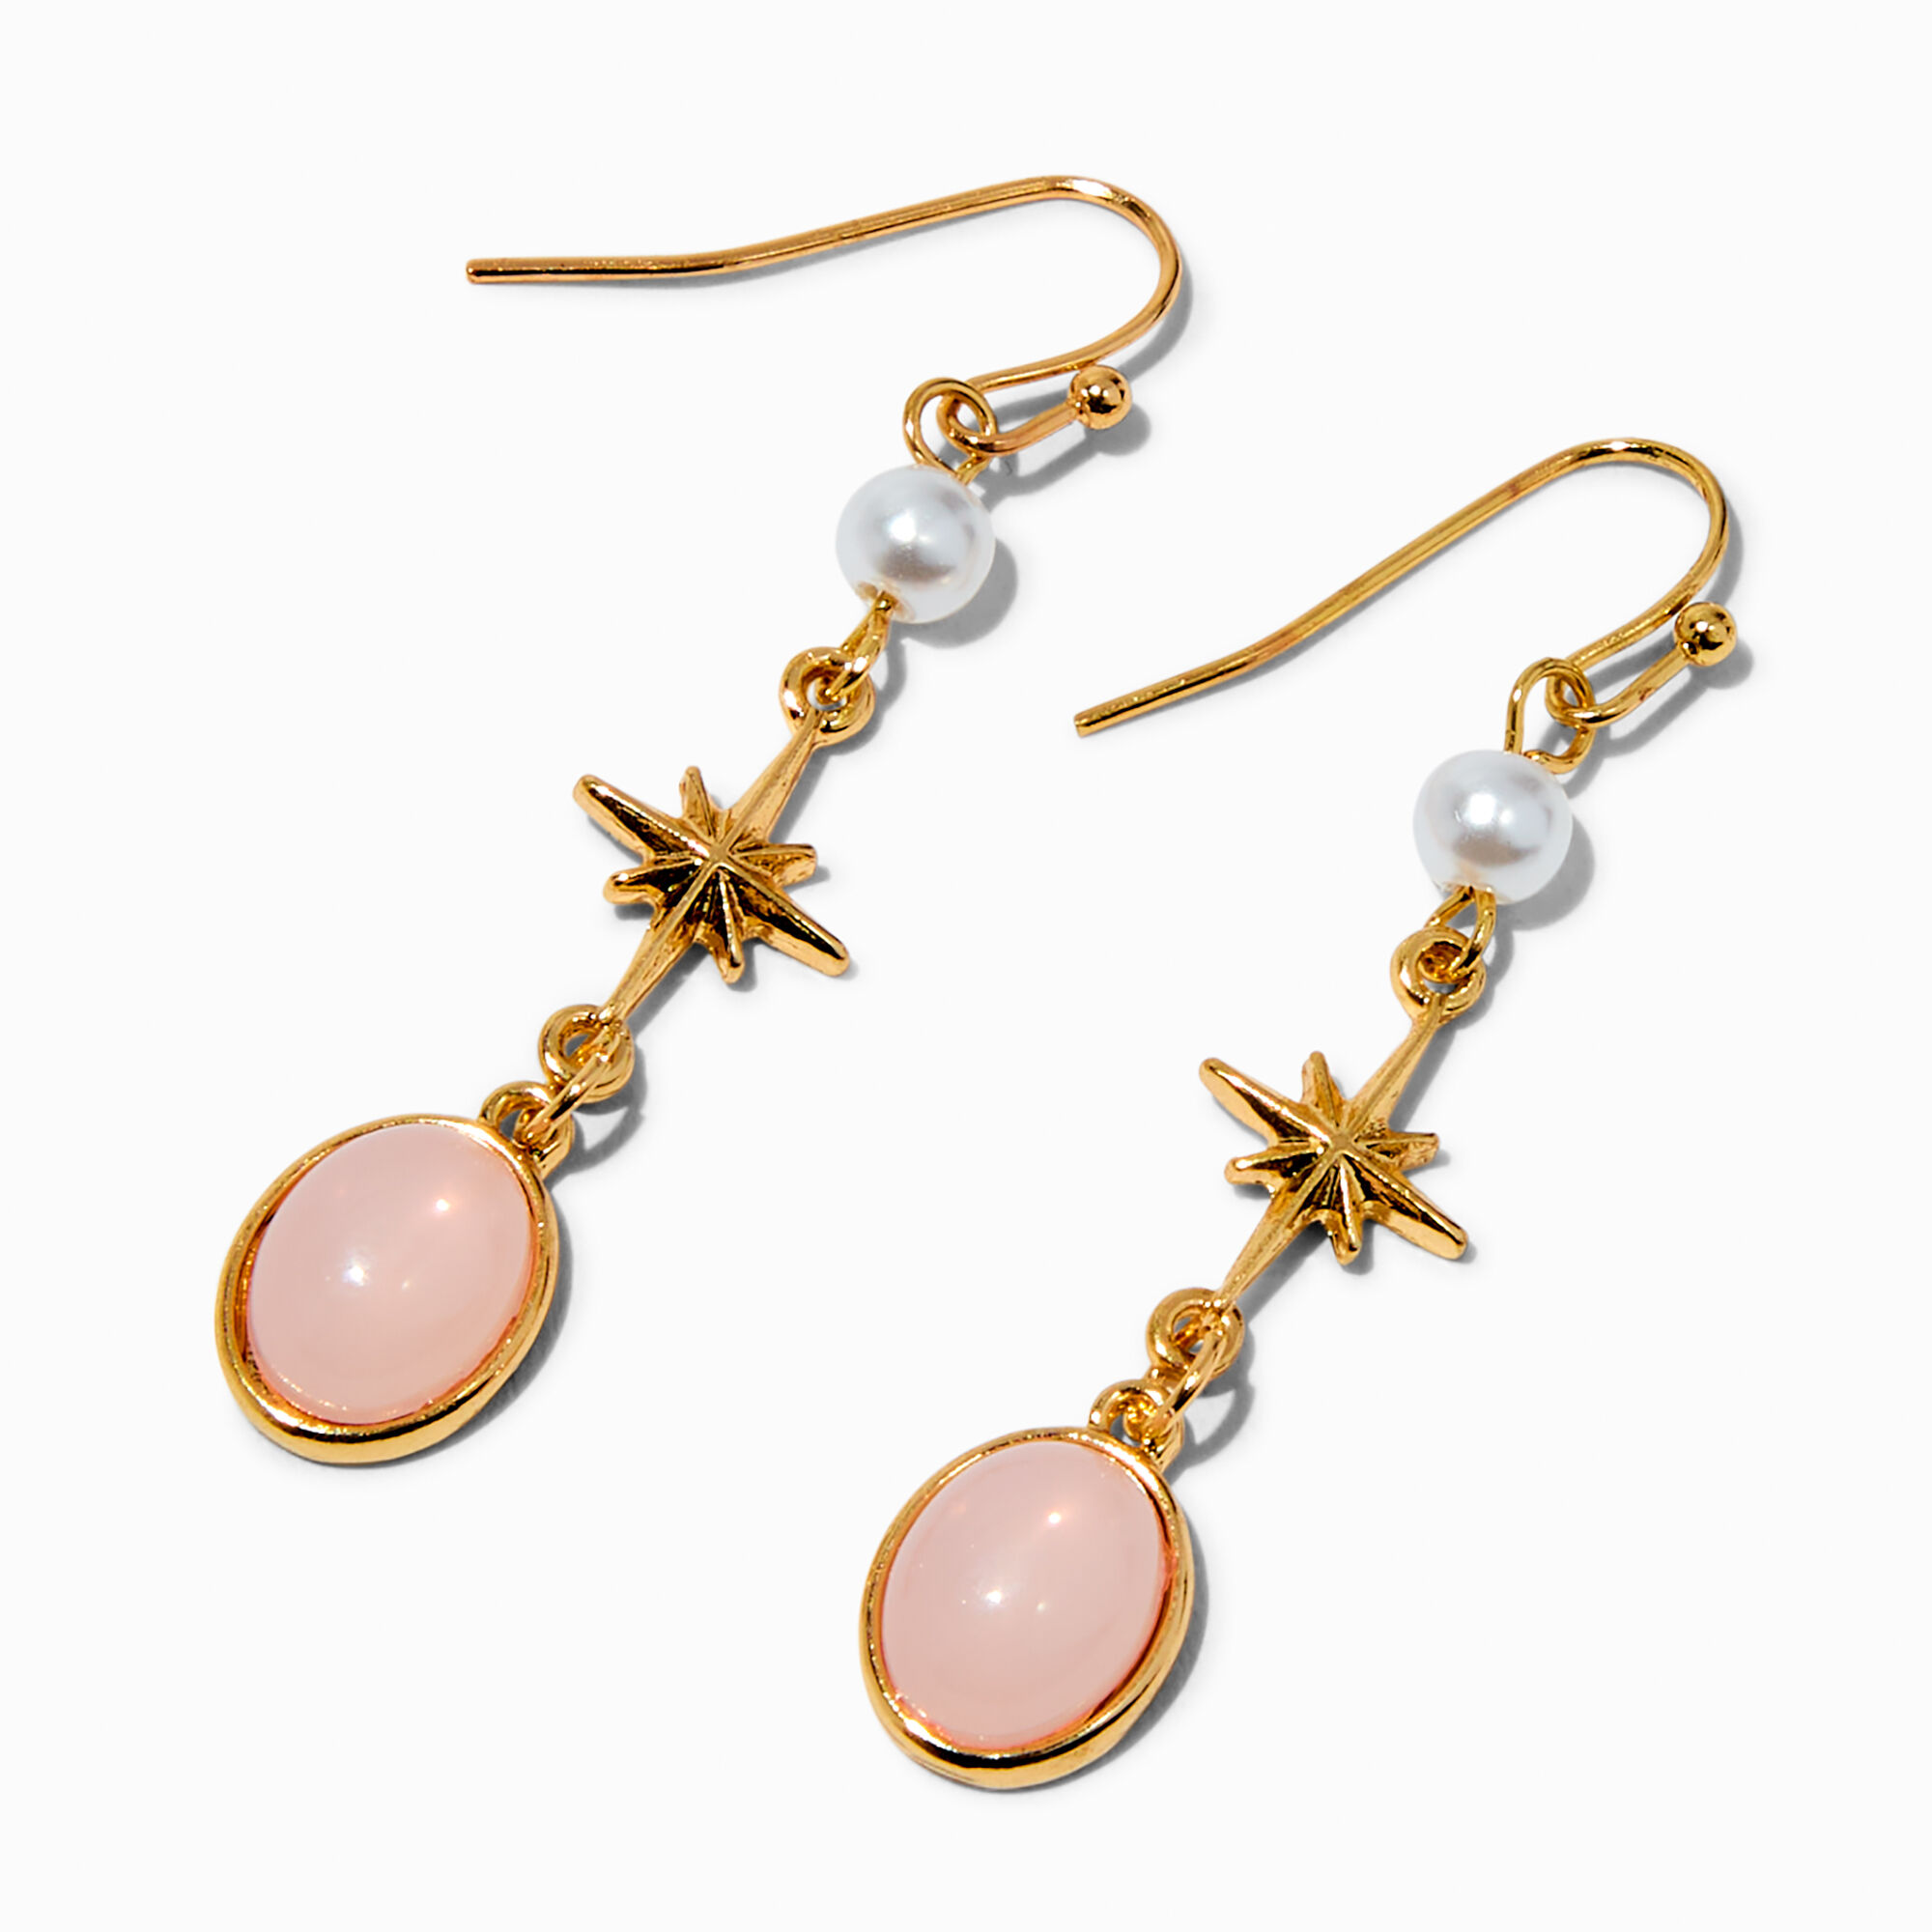 View Claires Mystical Gem Pearl 2 GoldTone Drop Earrings Pink information